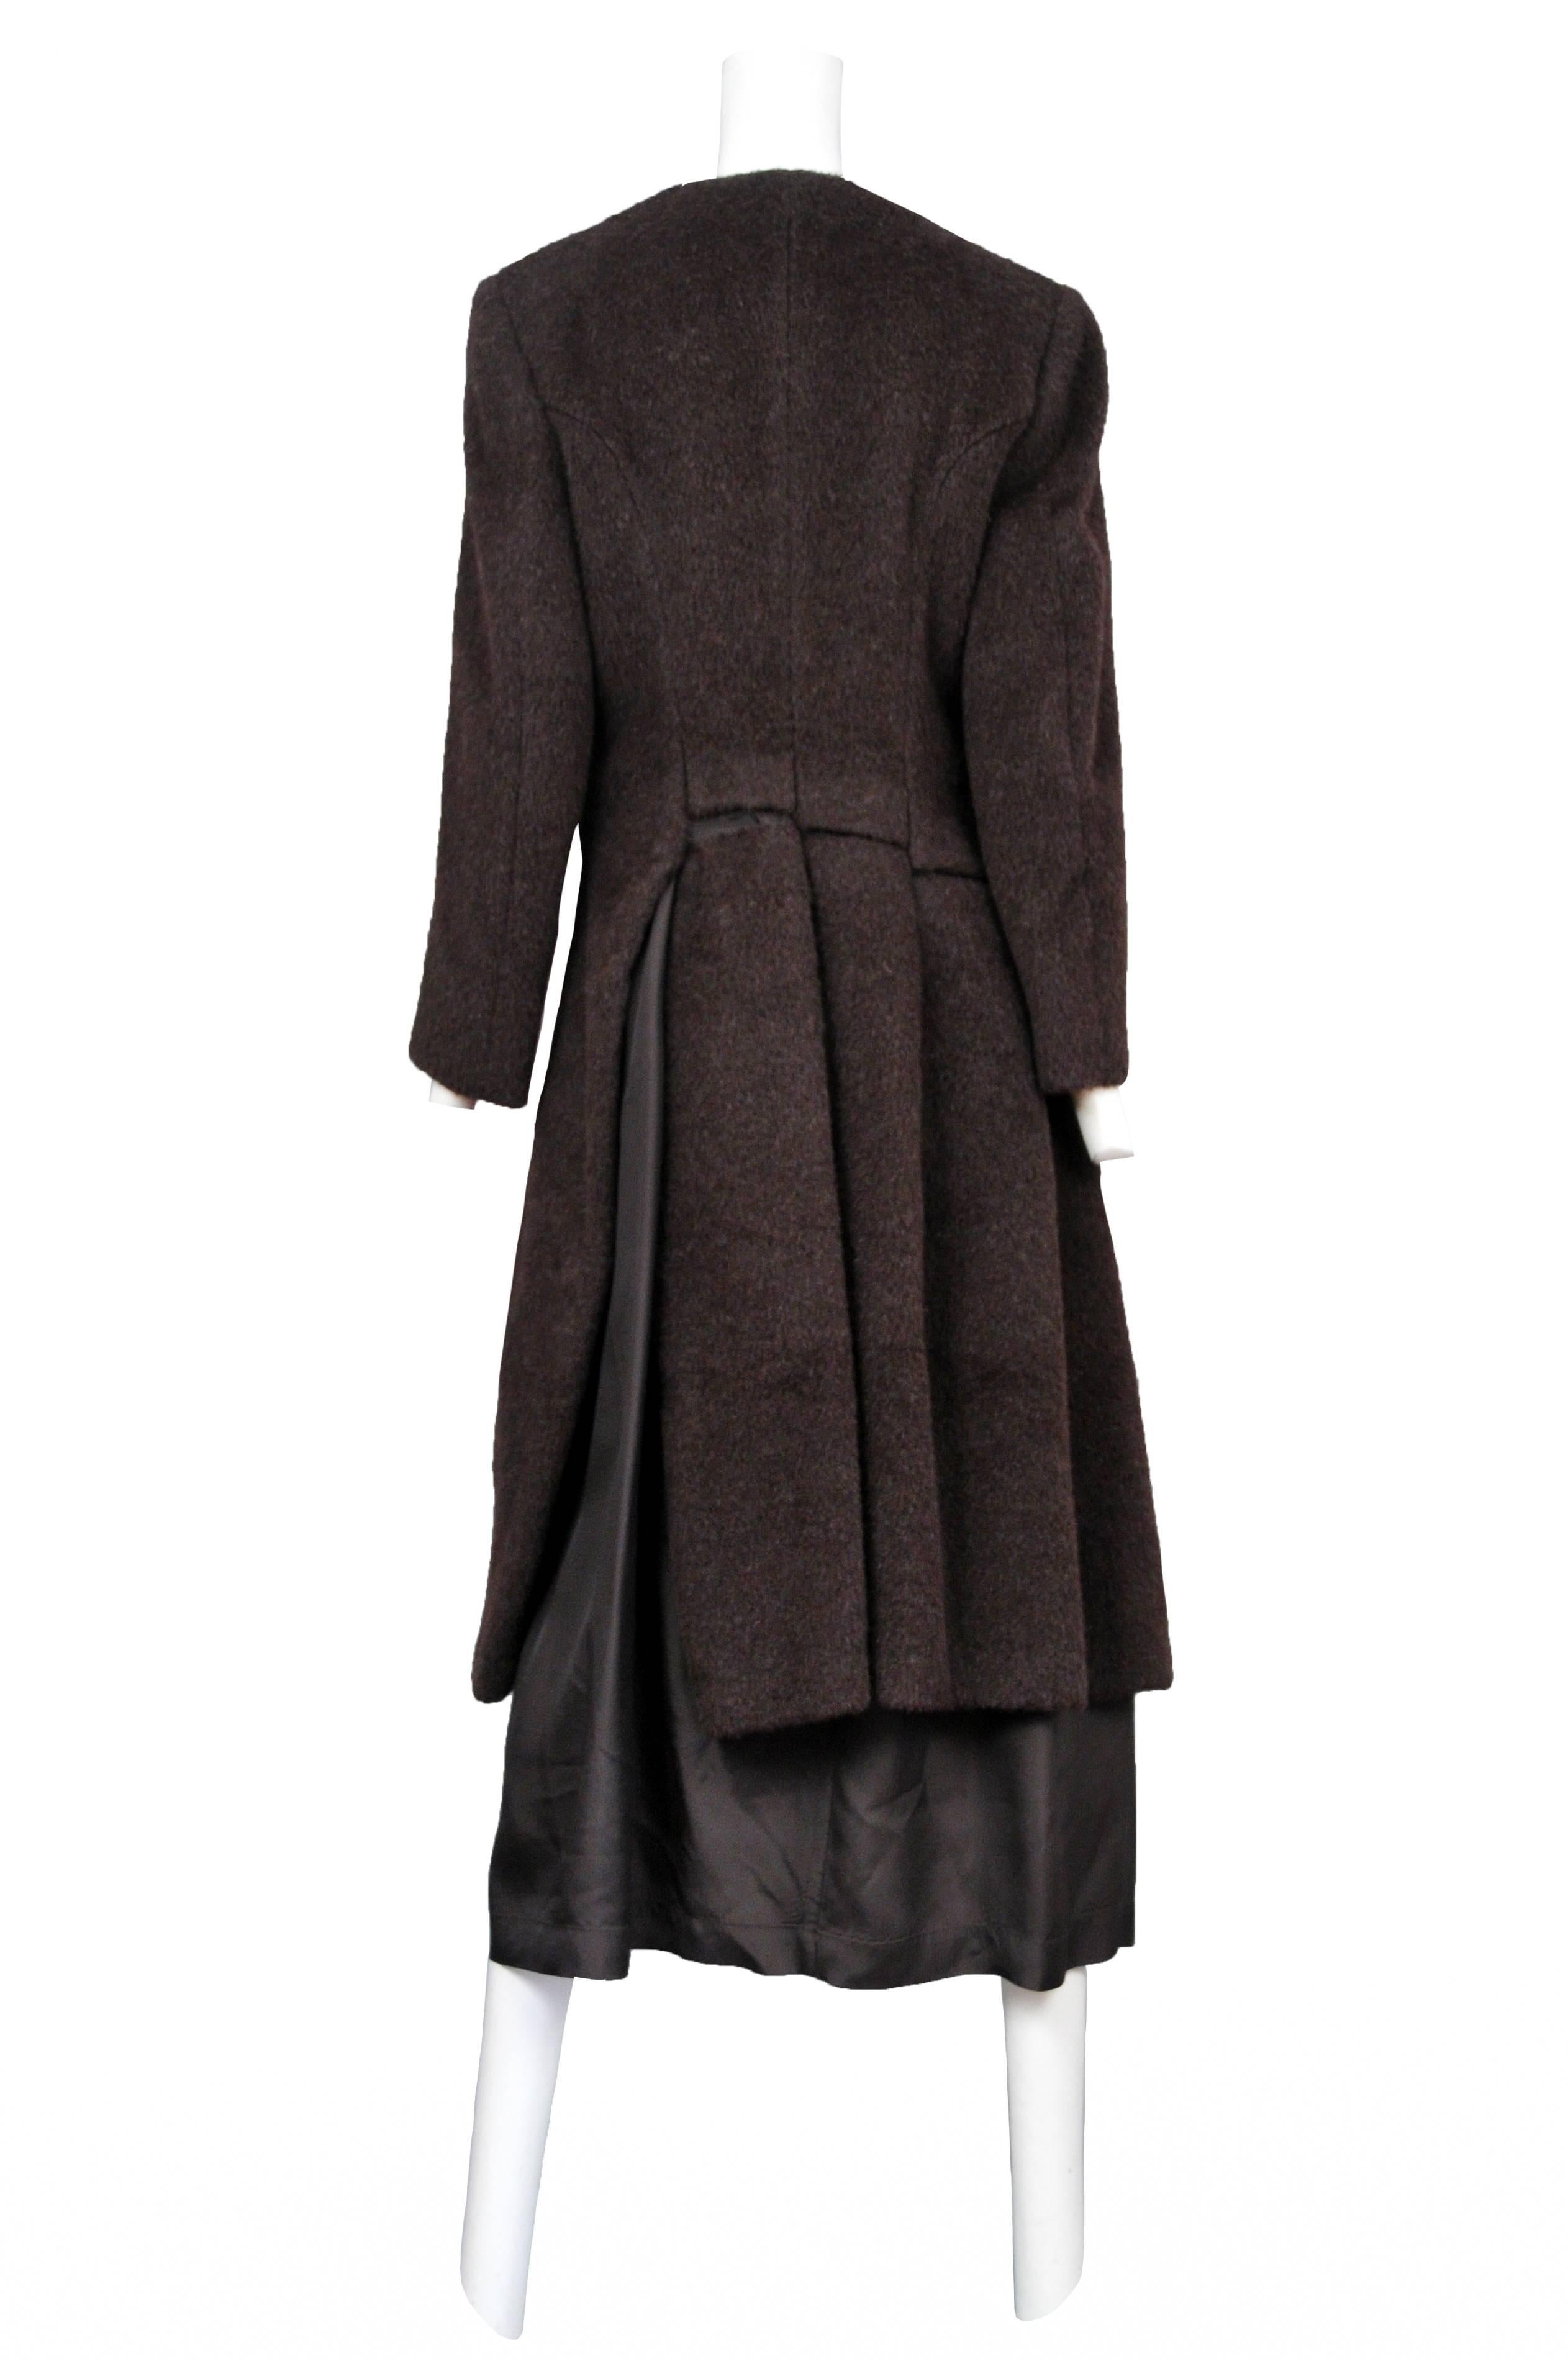 Vintage Comme des Garcons brown alpaca collarless coat featuring exposed brown lining at the hem and paneling at the back waist. Circa 1997.